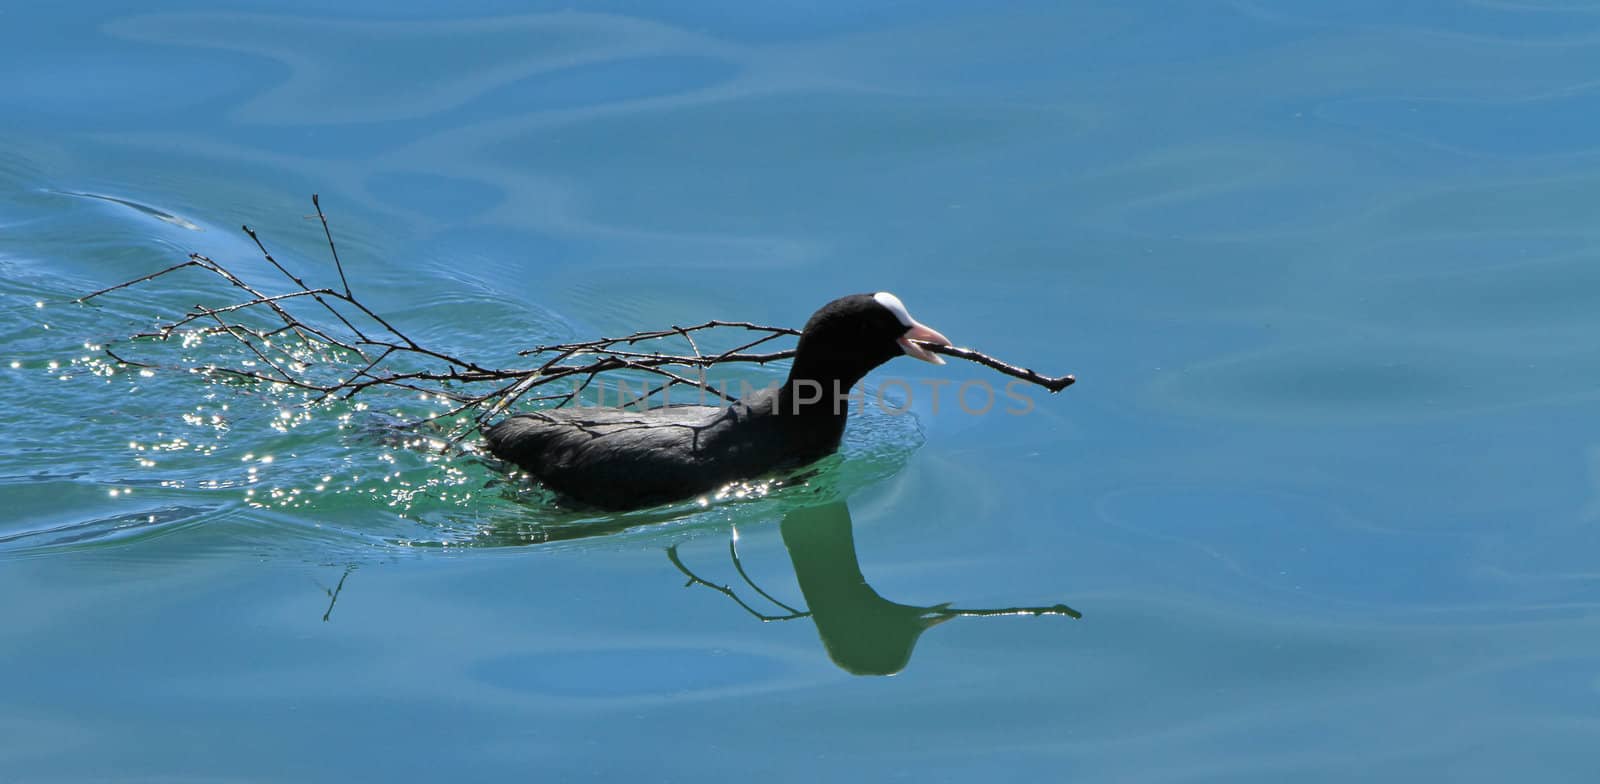 Black and white coot duck holding a branch while swimming on the water